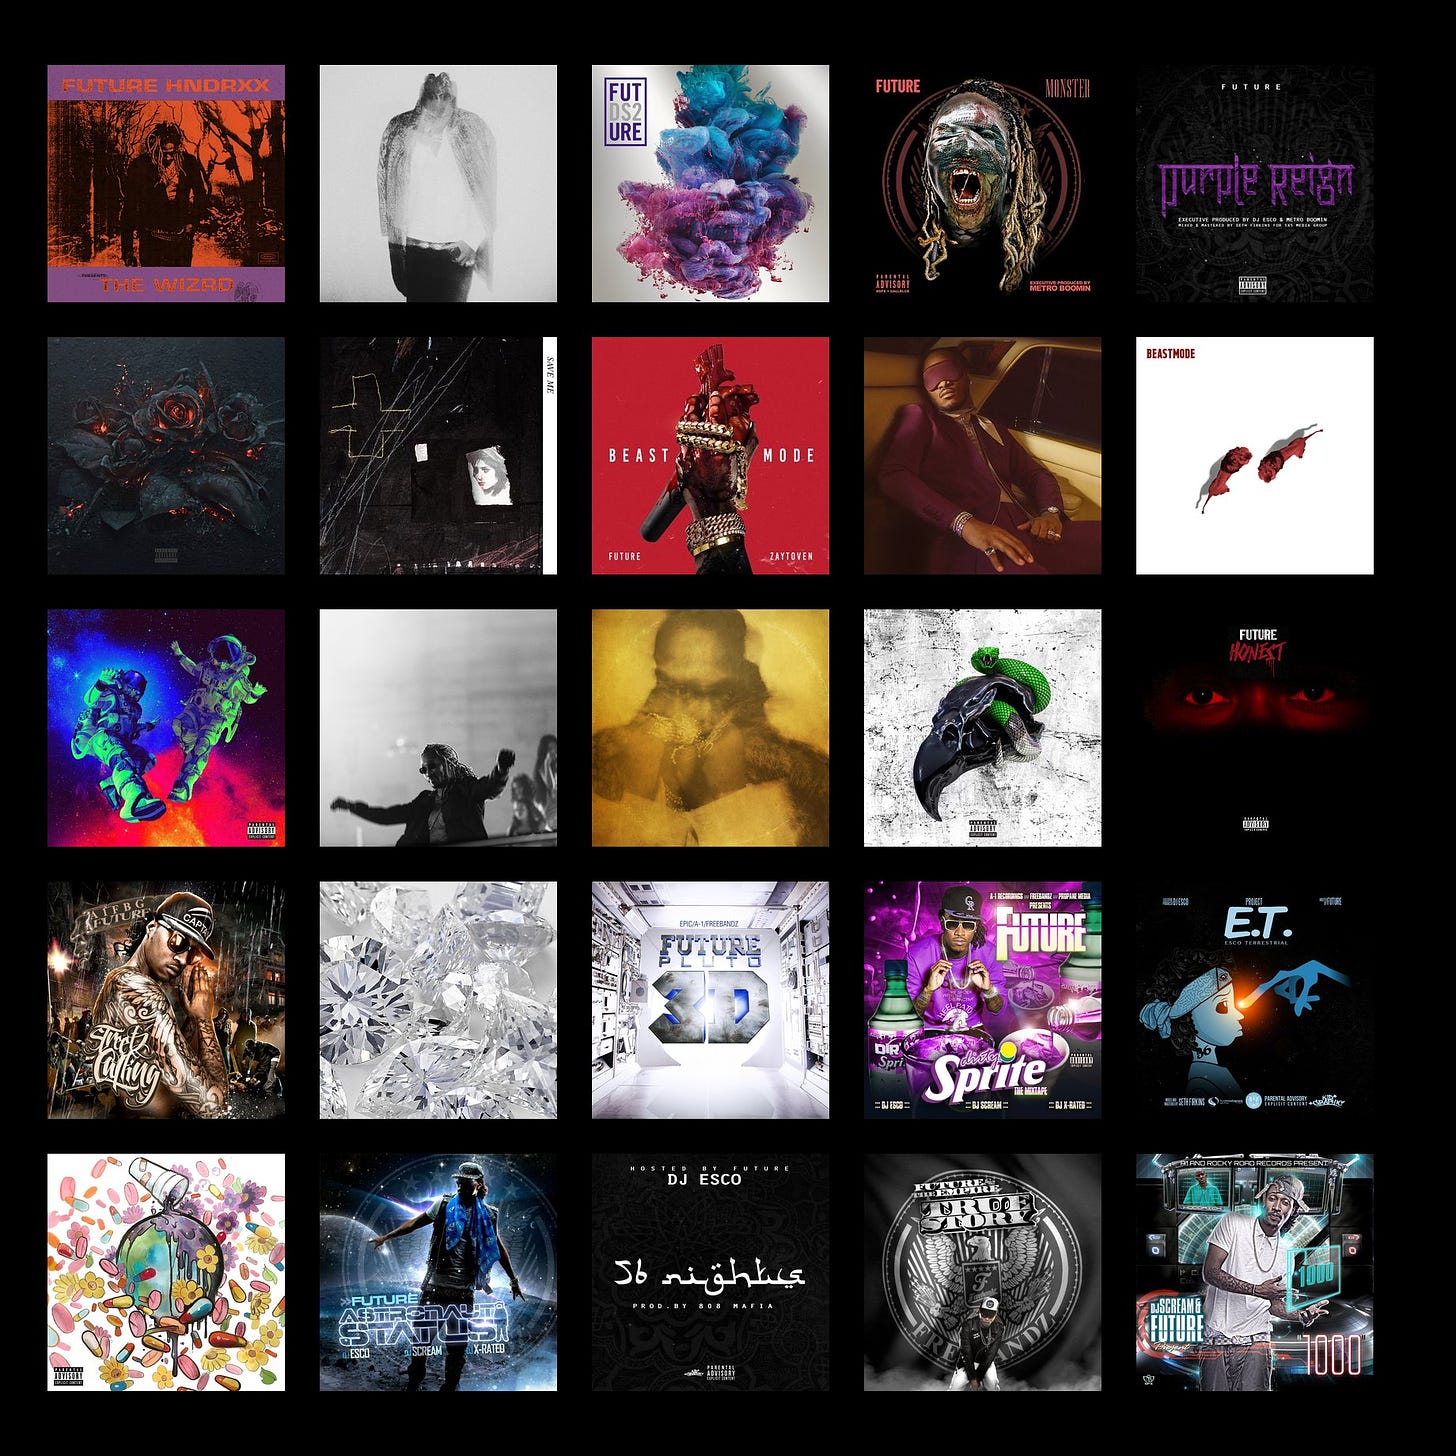 b r a n d i on X: "future discography ranked in my humble opinion no bad  album here https://t.co/400gYVuRNn" / X